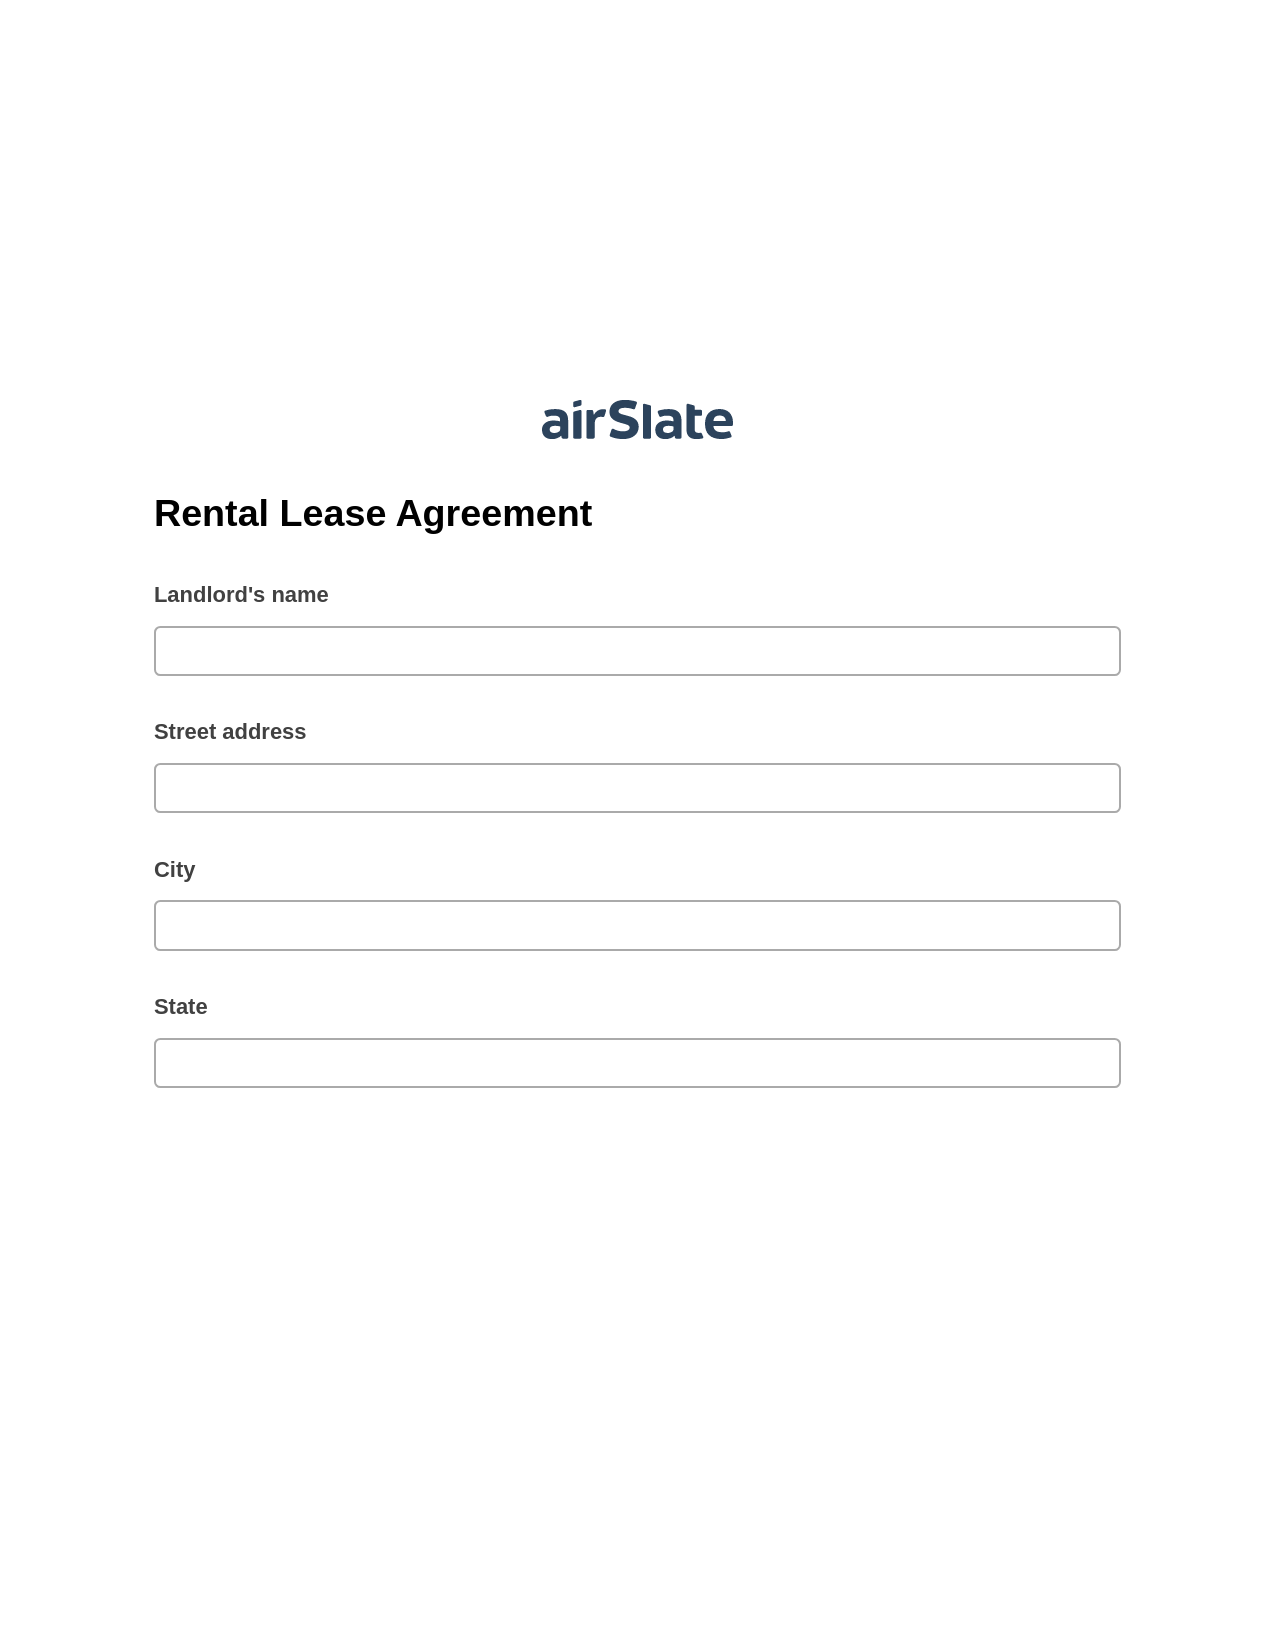 Rental Lease Agreement Pre-fill from Salesforce Record Bot, System Bot - Create a Slate in another Flow, Export to Excel 365 Bot